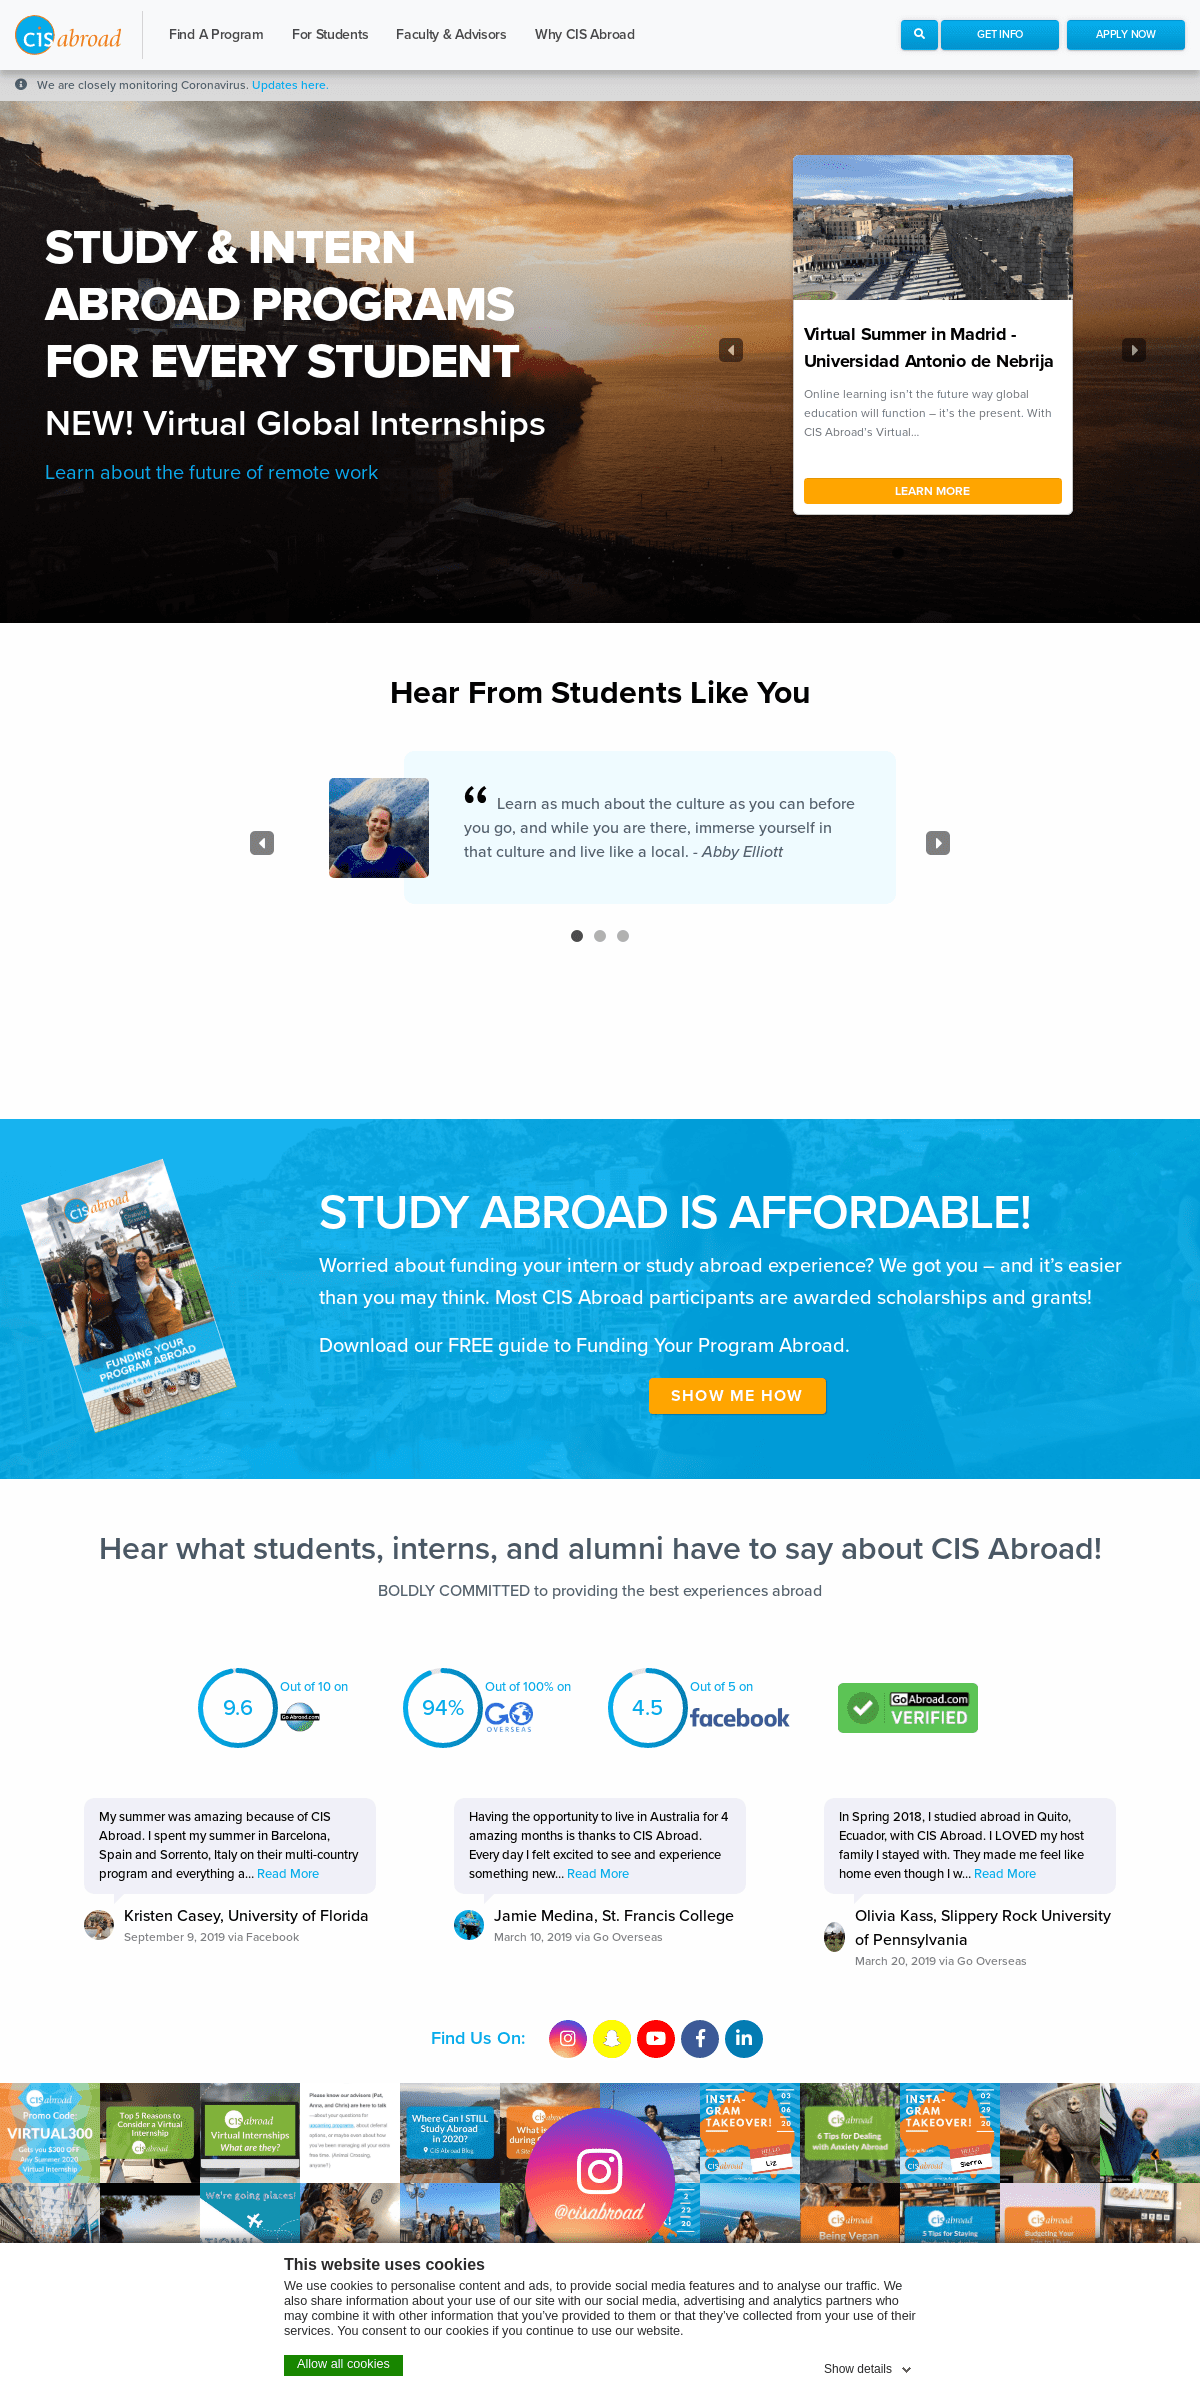 A complete backup of cisabroad.com